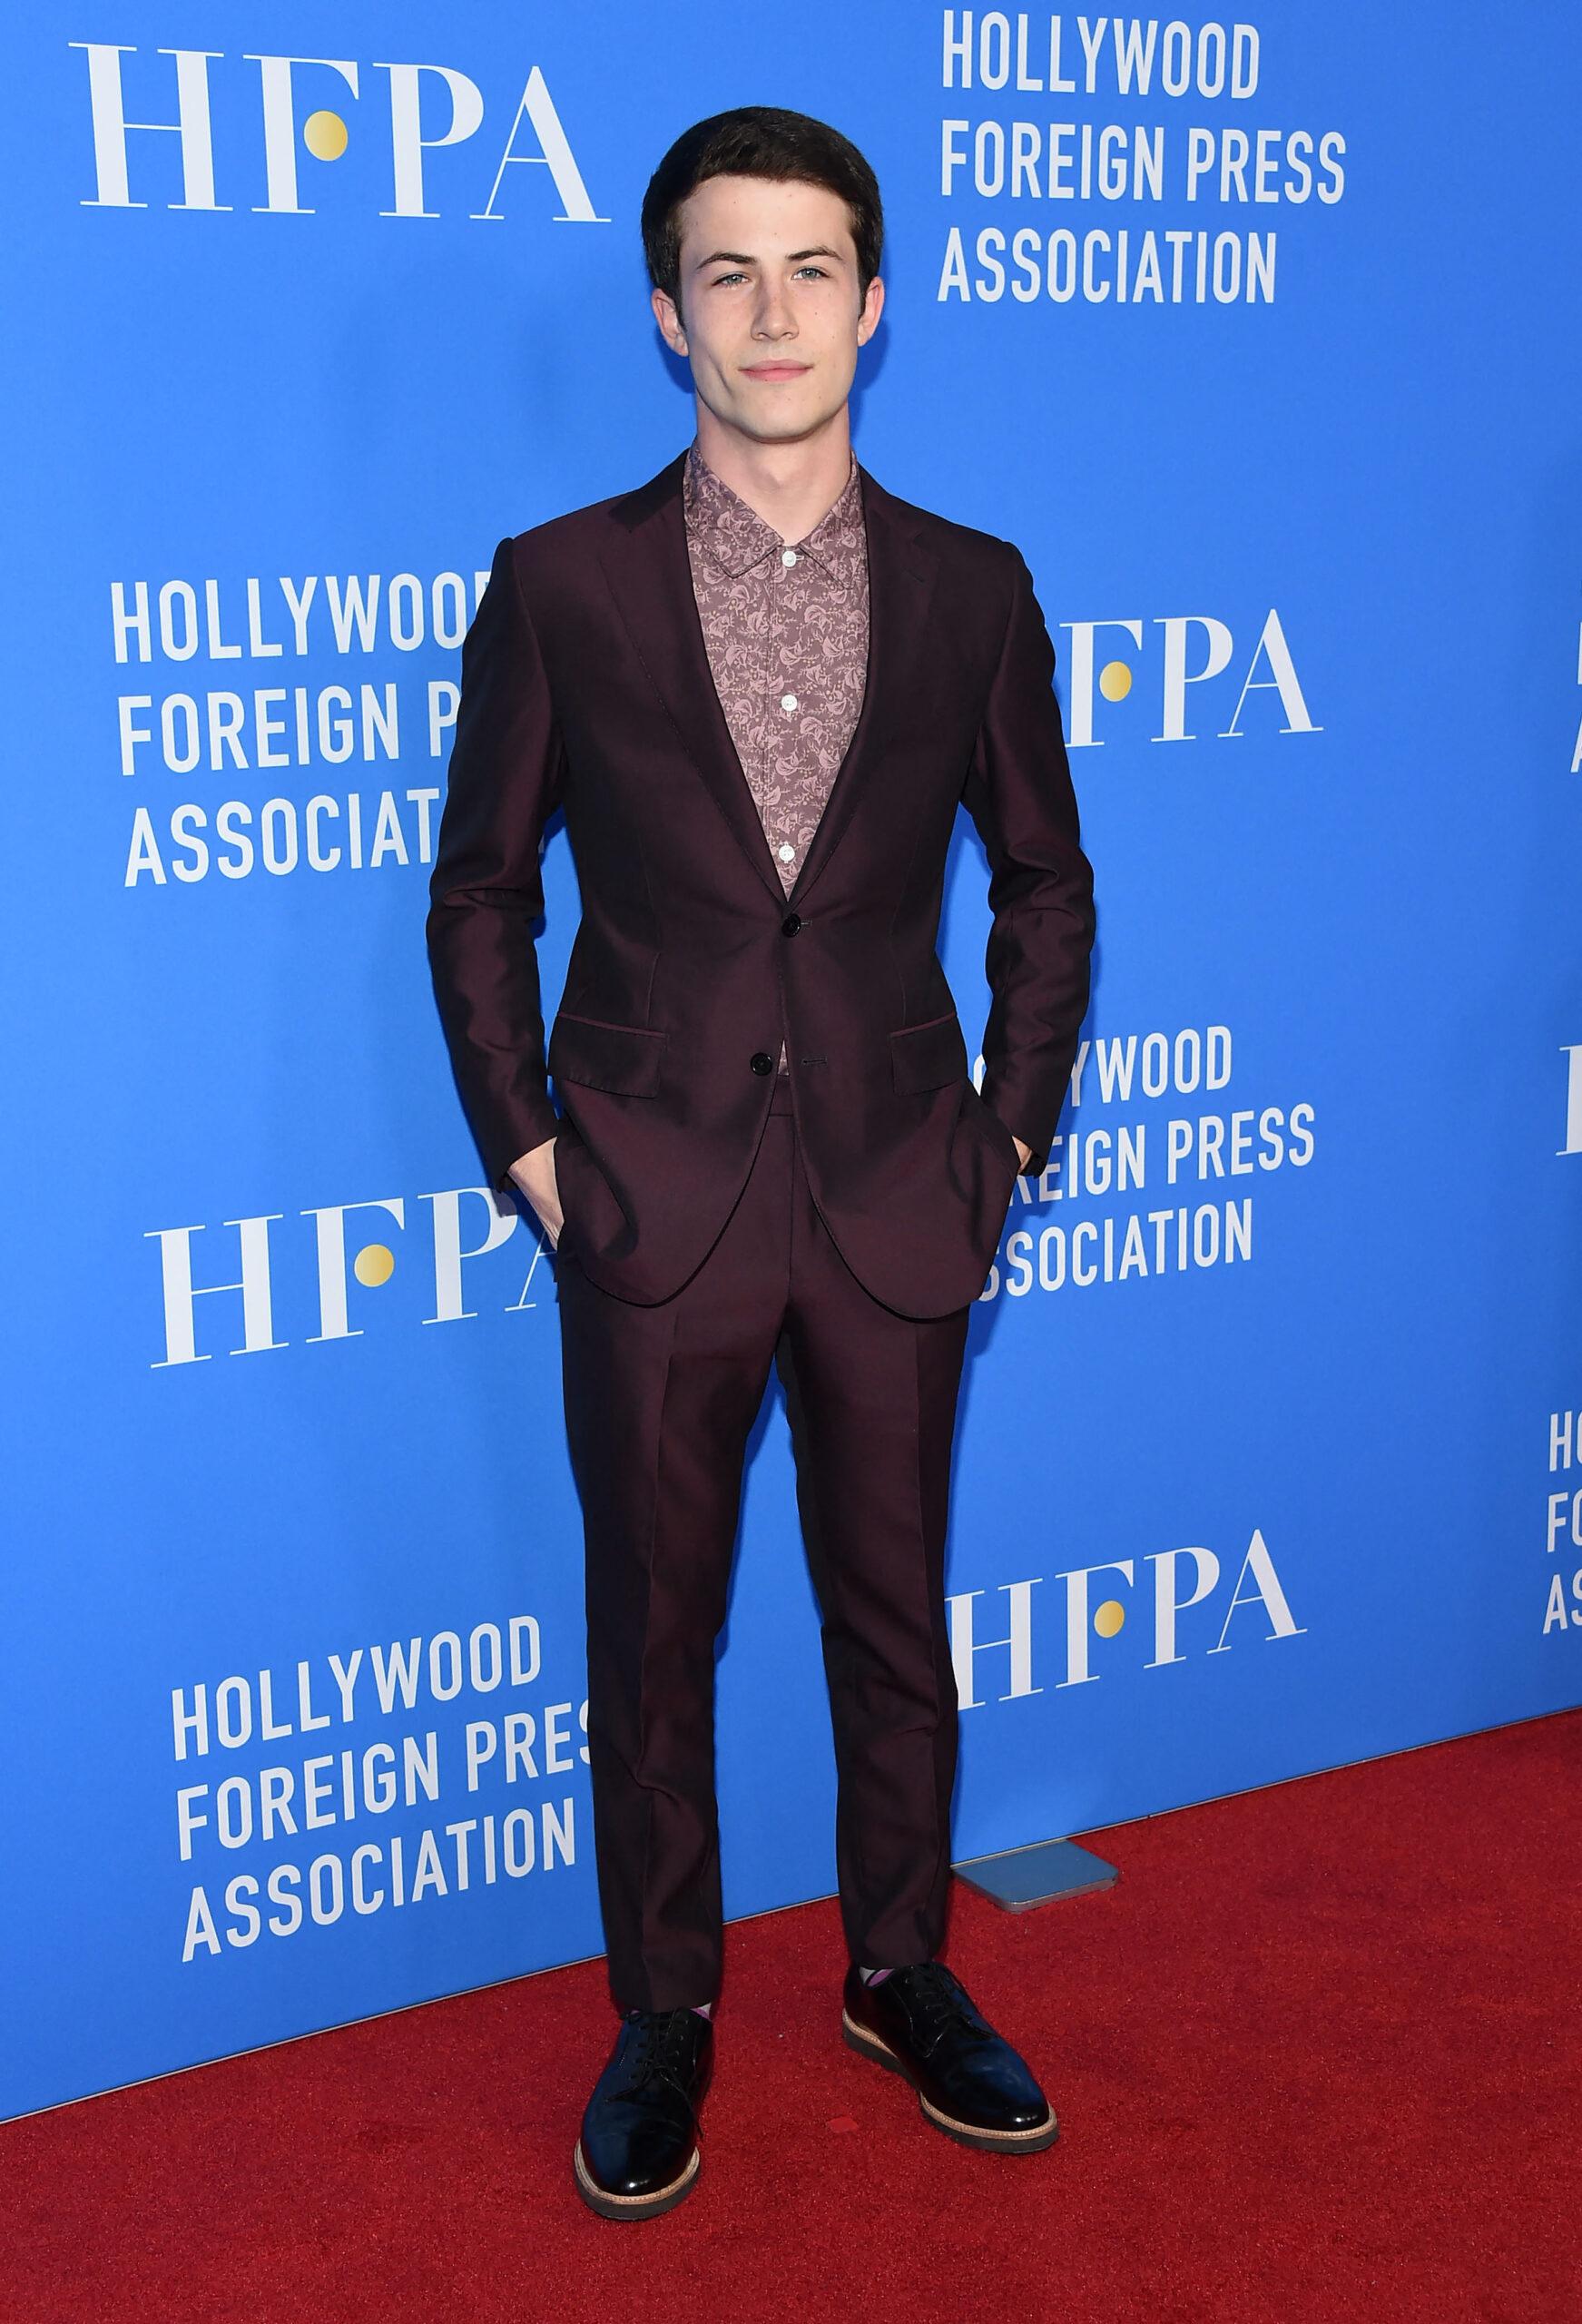 Dylan Minnette at HFPA's Grants Banquet